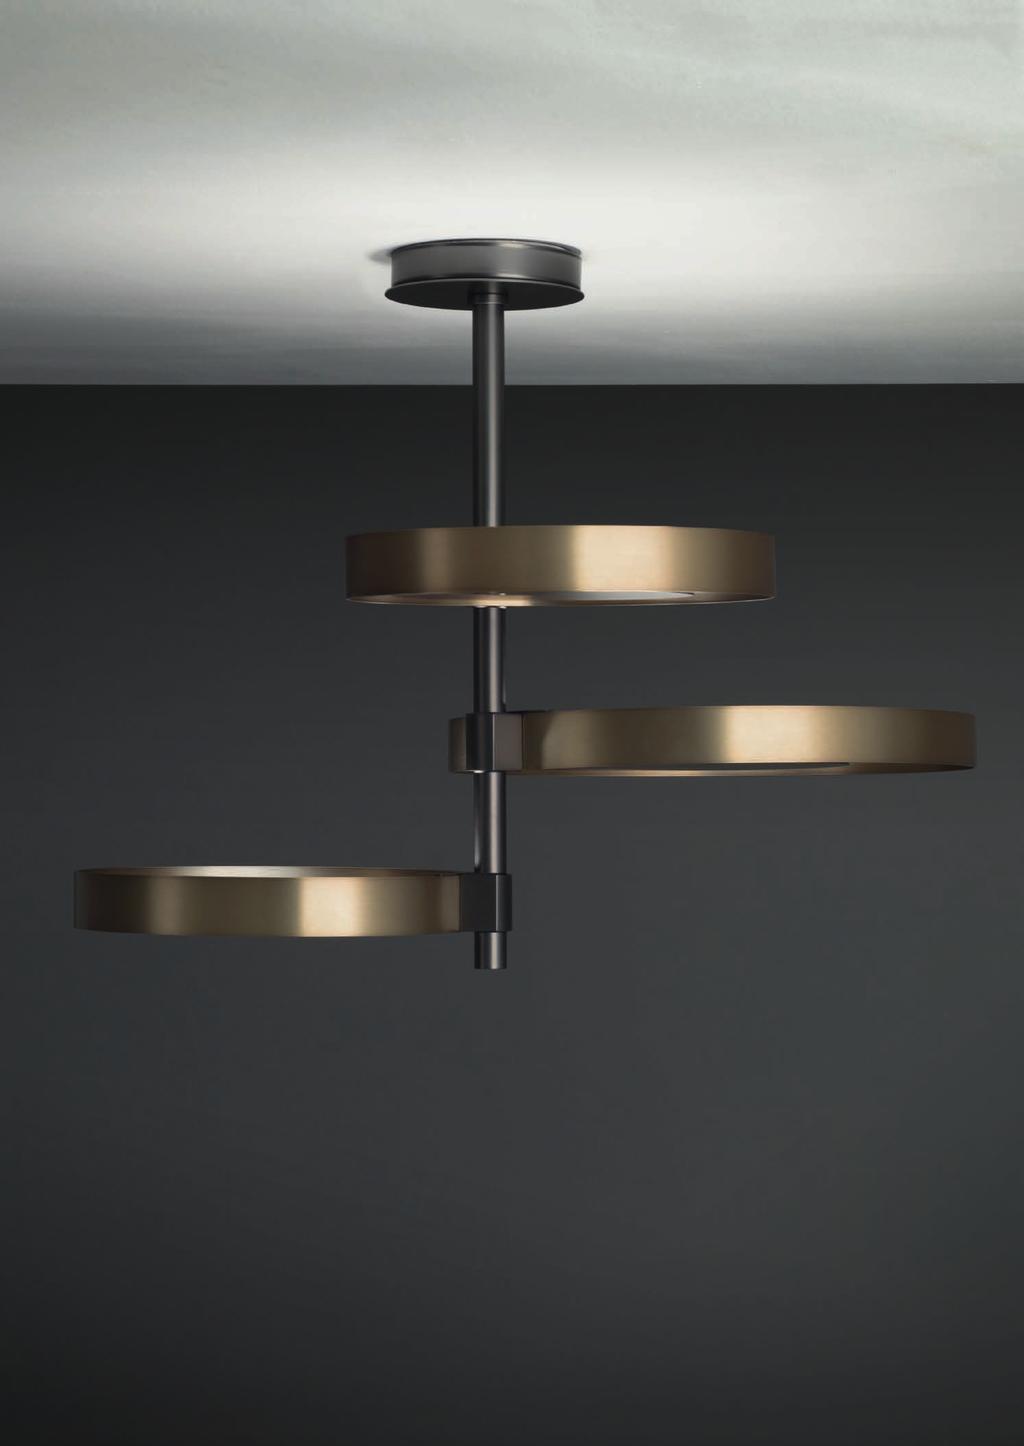 CIRCLE CEILING 45cm-17 7 Ø 58cm-22 8 Ceiling lamp with indirect light, satinated natural brass rings and matte black nickel central